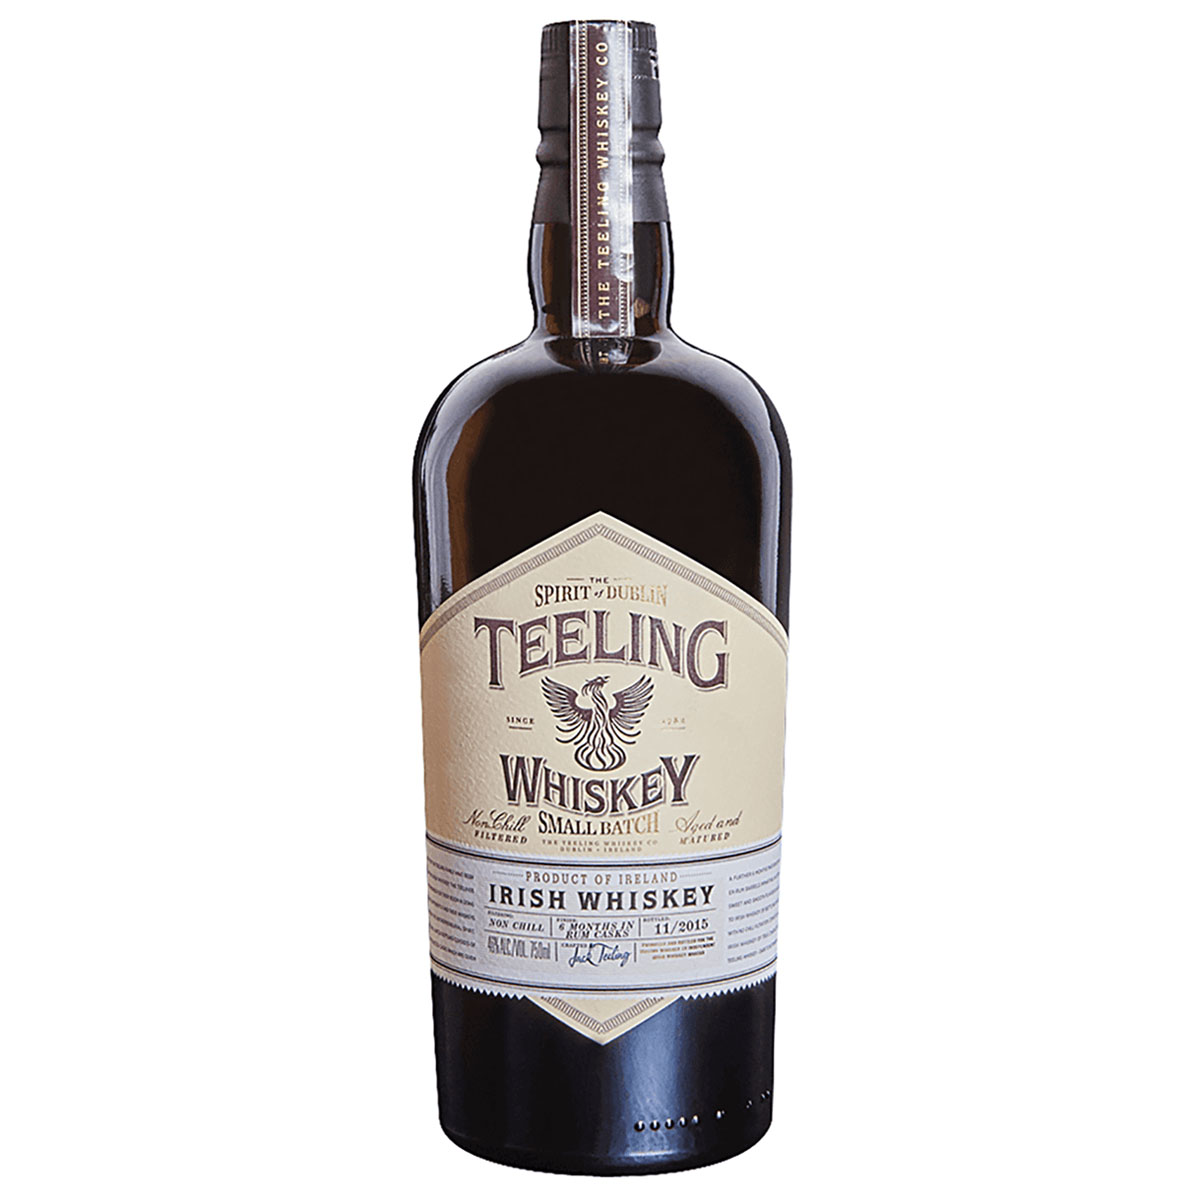 a bottle of teeling small batch whisky